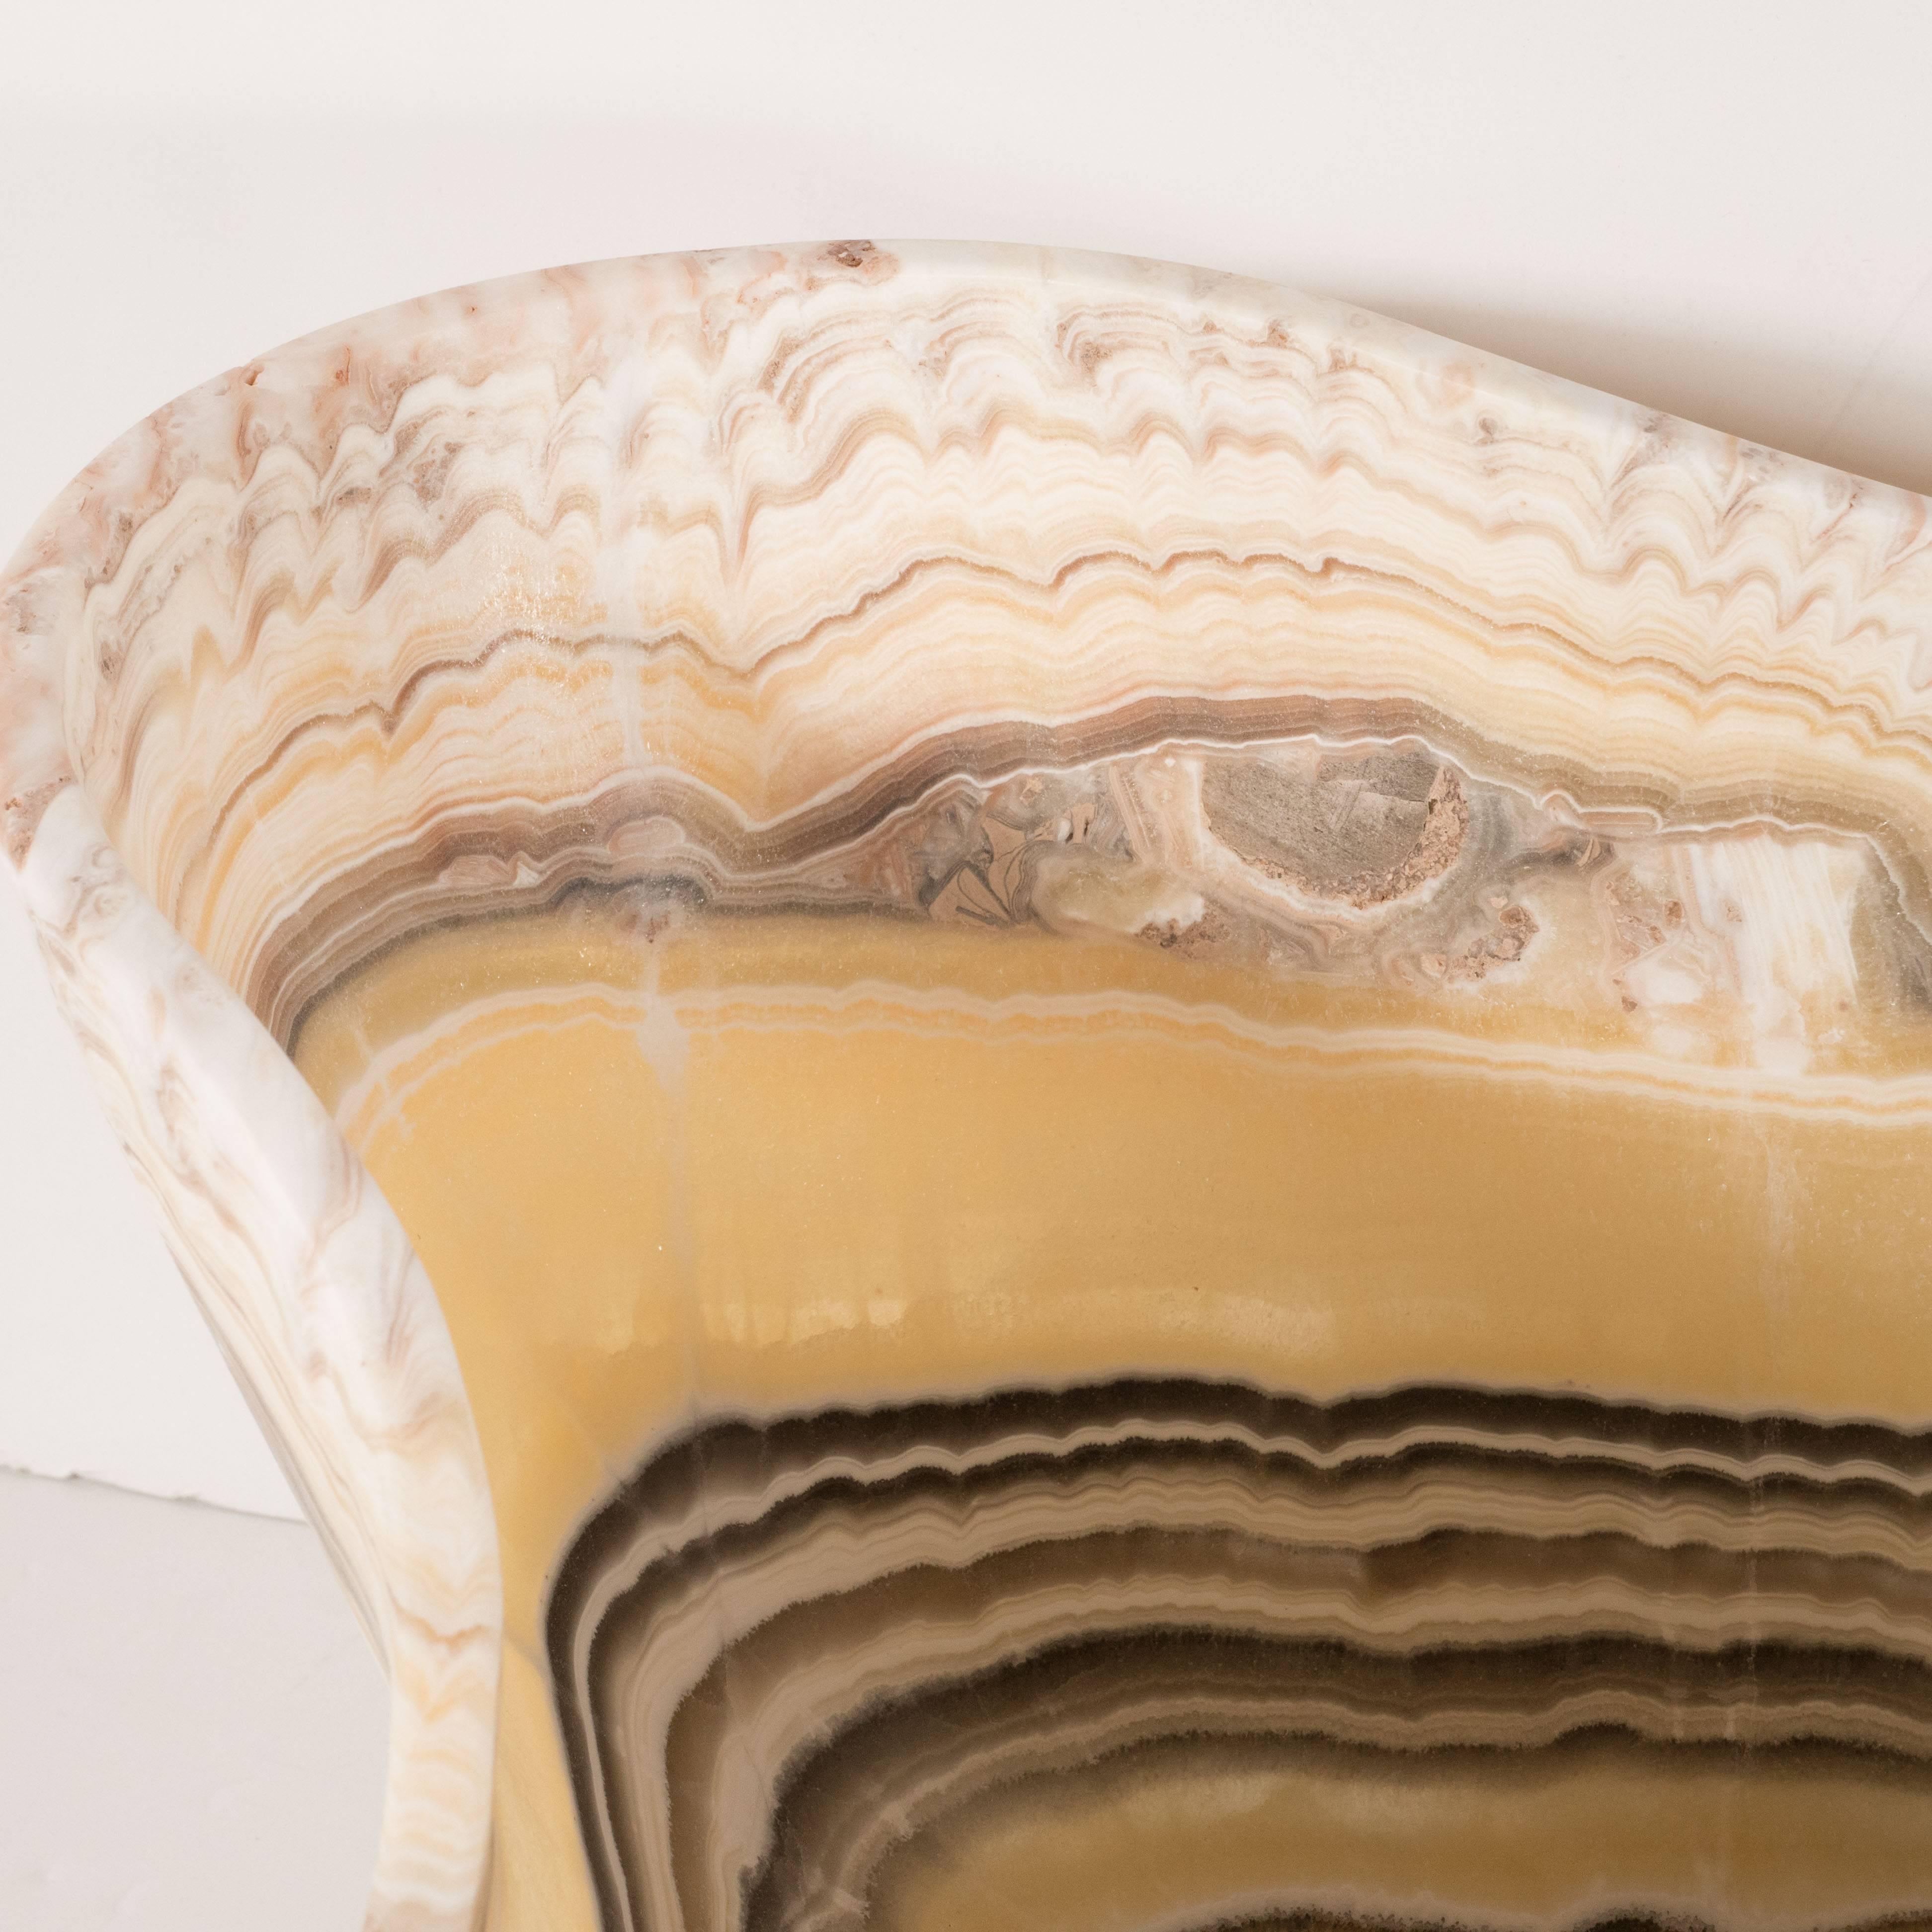 Organic Modern Agate Bowl with Grisaille Bands against a Honeyed Background 2